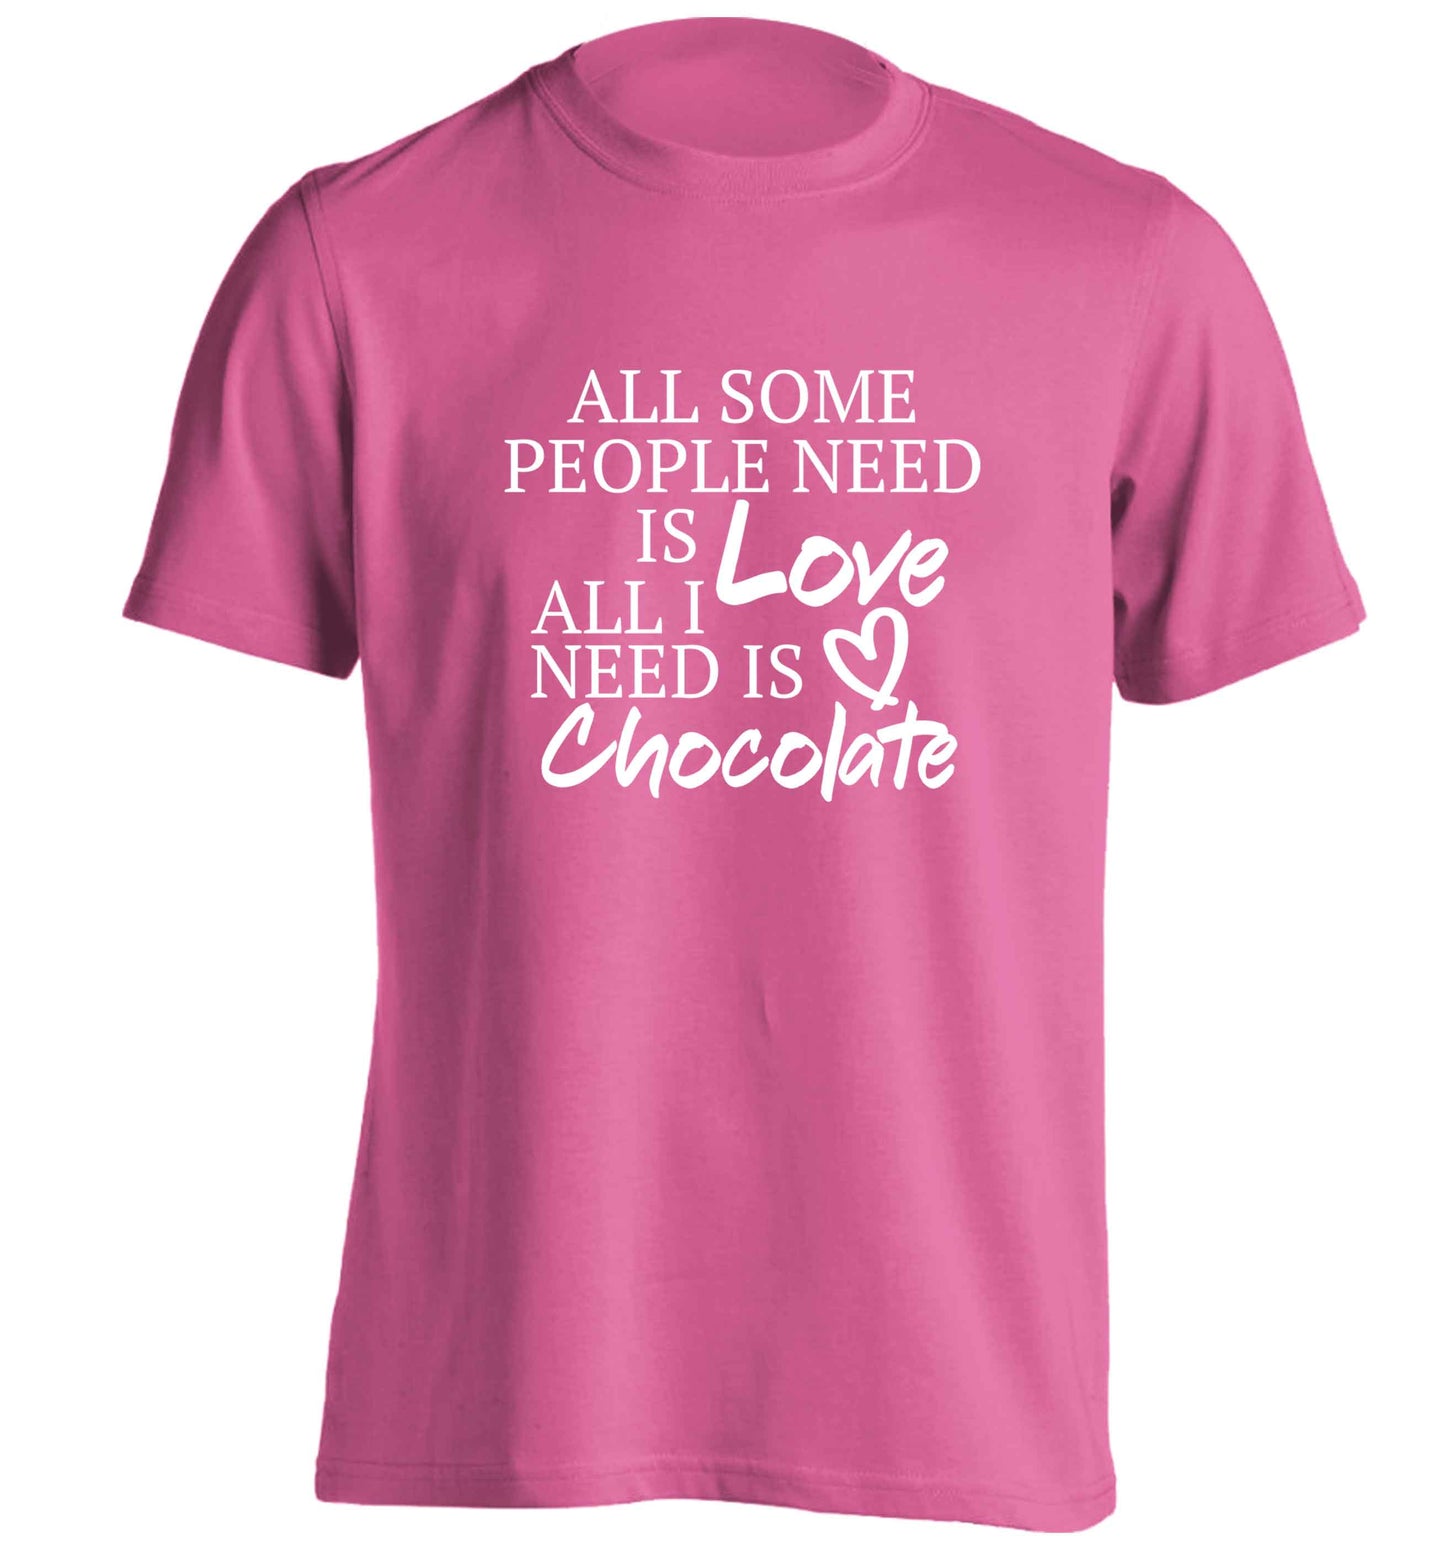 All some people need is love all I need is chocolate adults unisex pink Tshirt 2XL